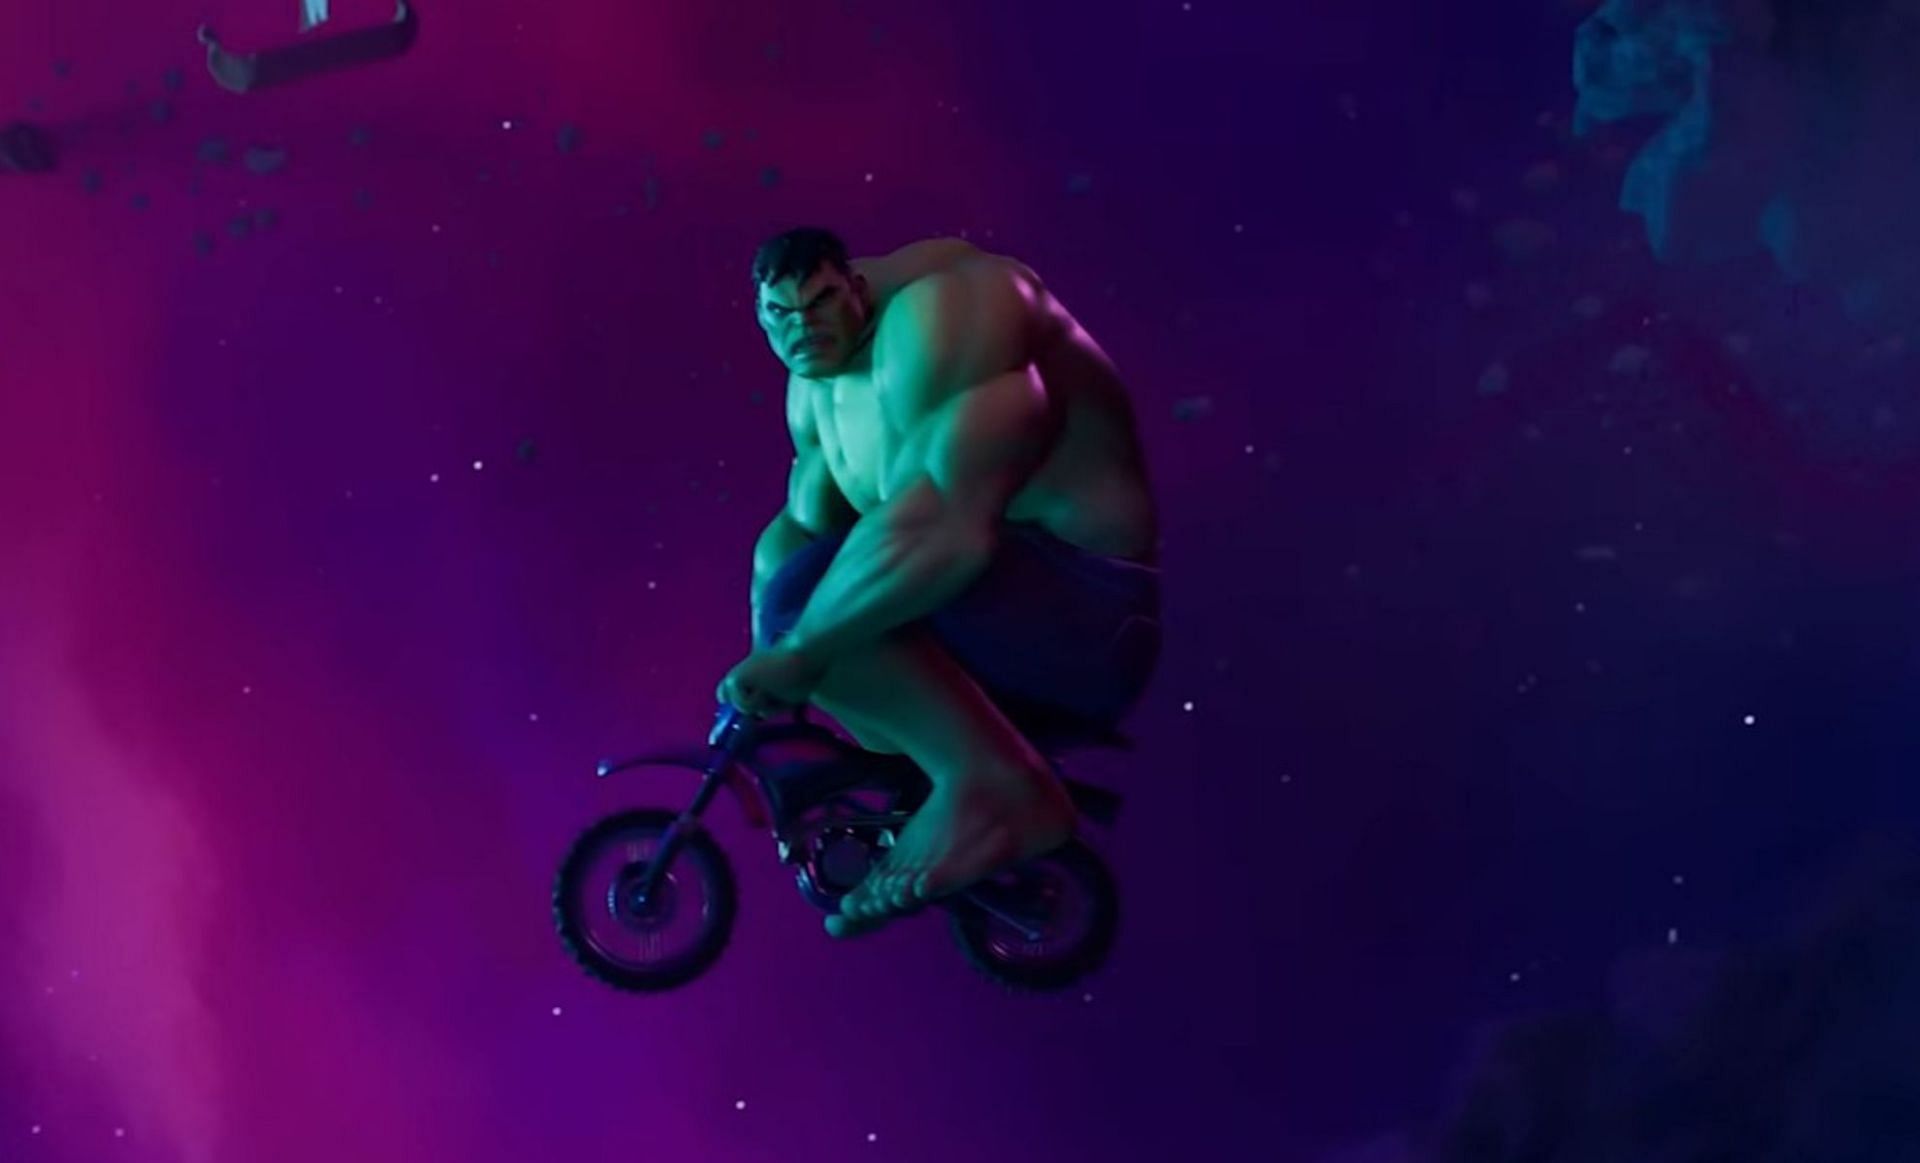 When is Hulk coming to Fortnite? (Image via HYPEX on Twitter)